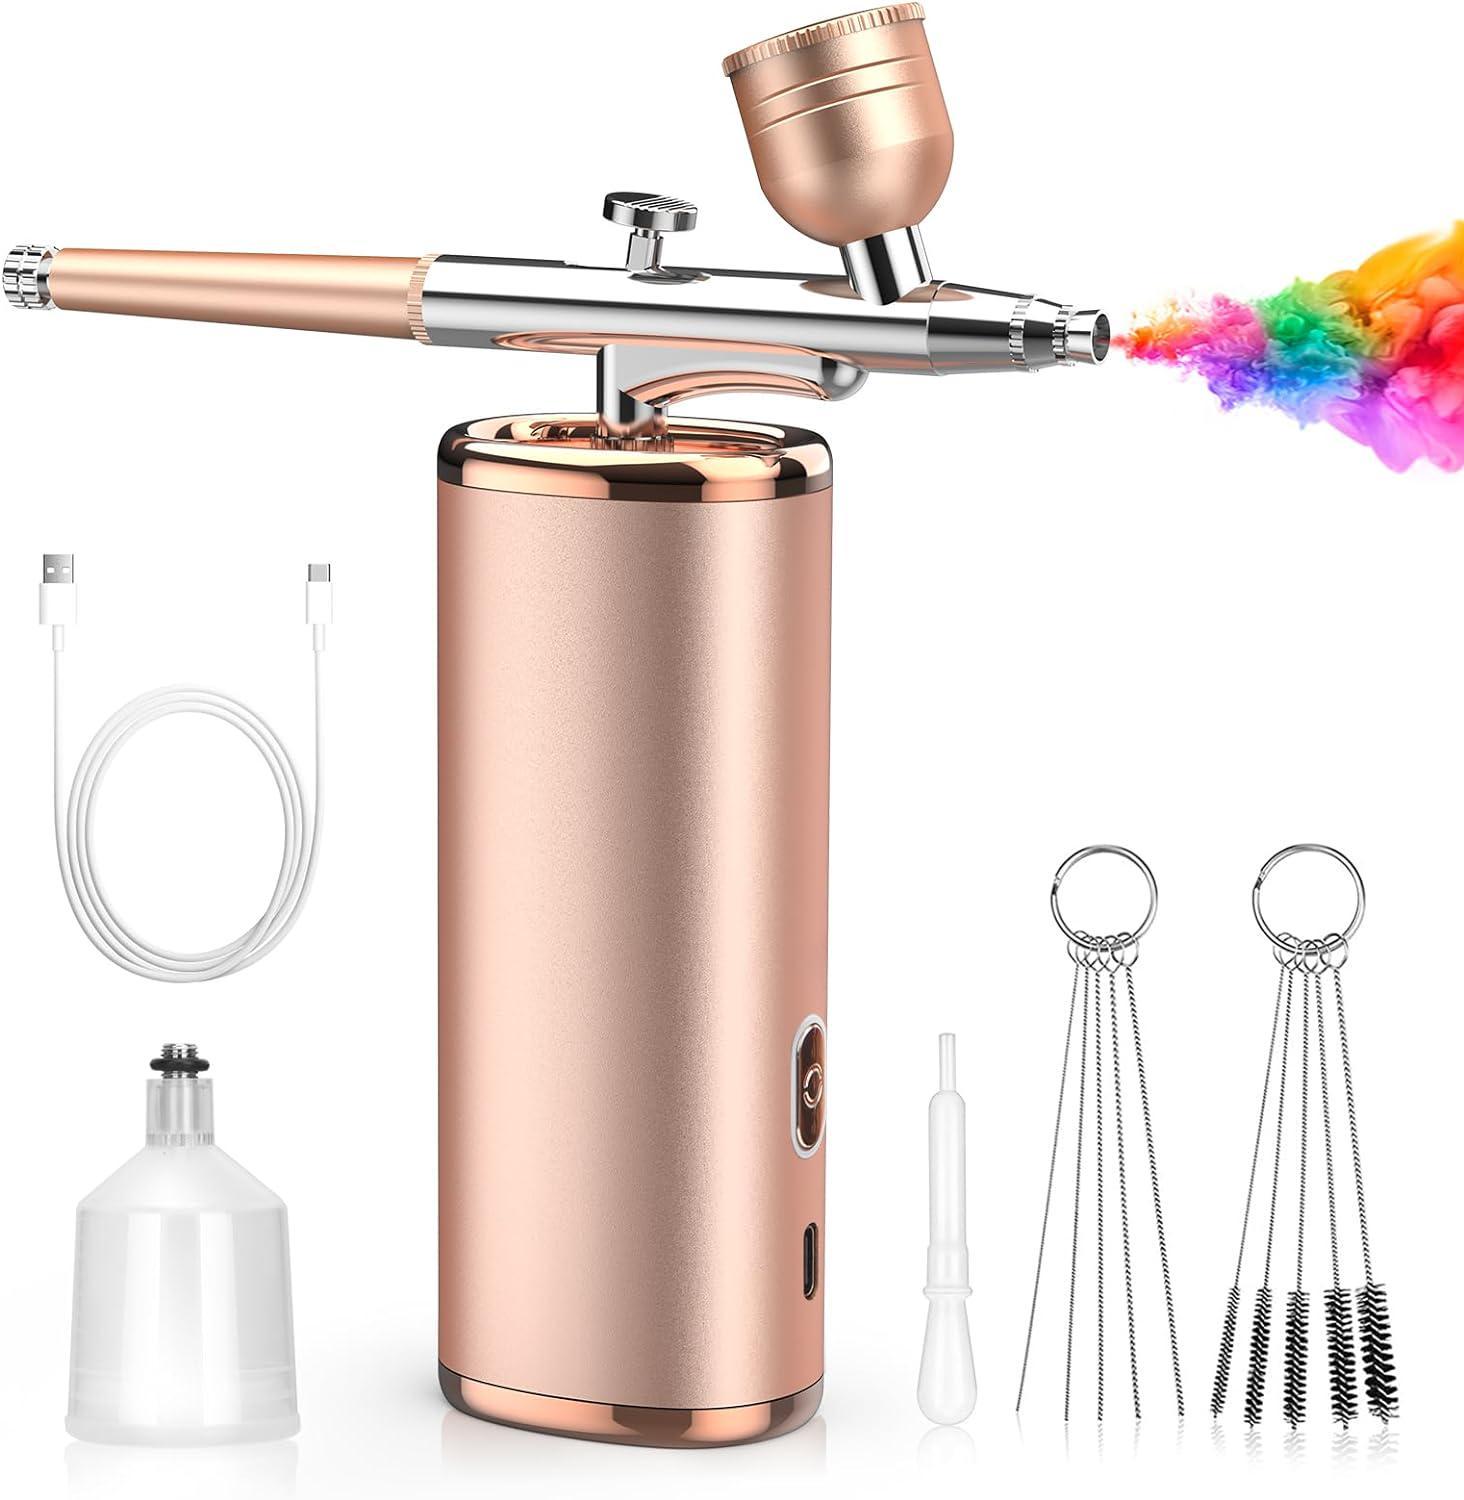 Airbrush Kit with Compressor - Cordless and similar items